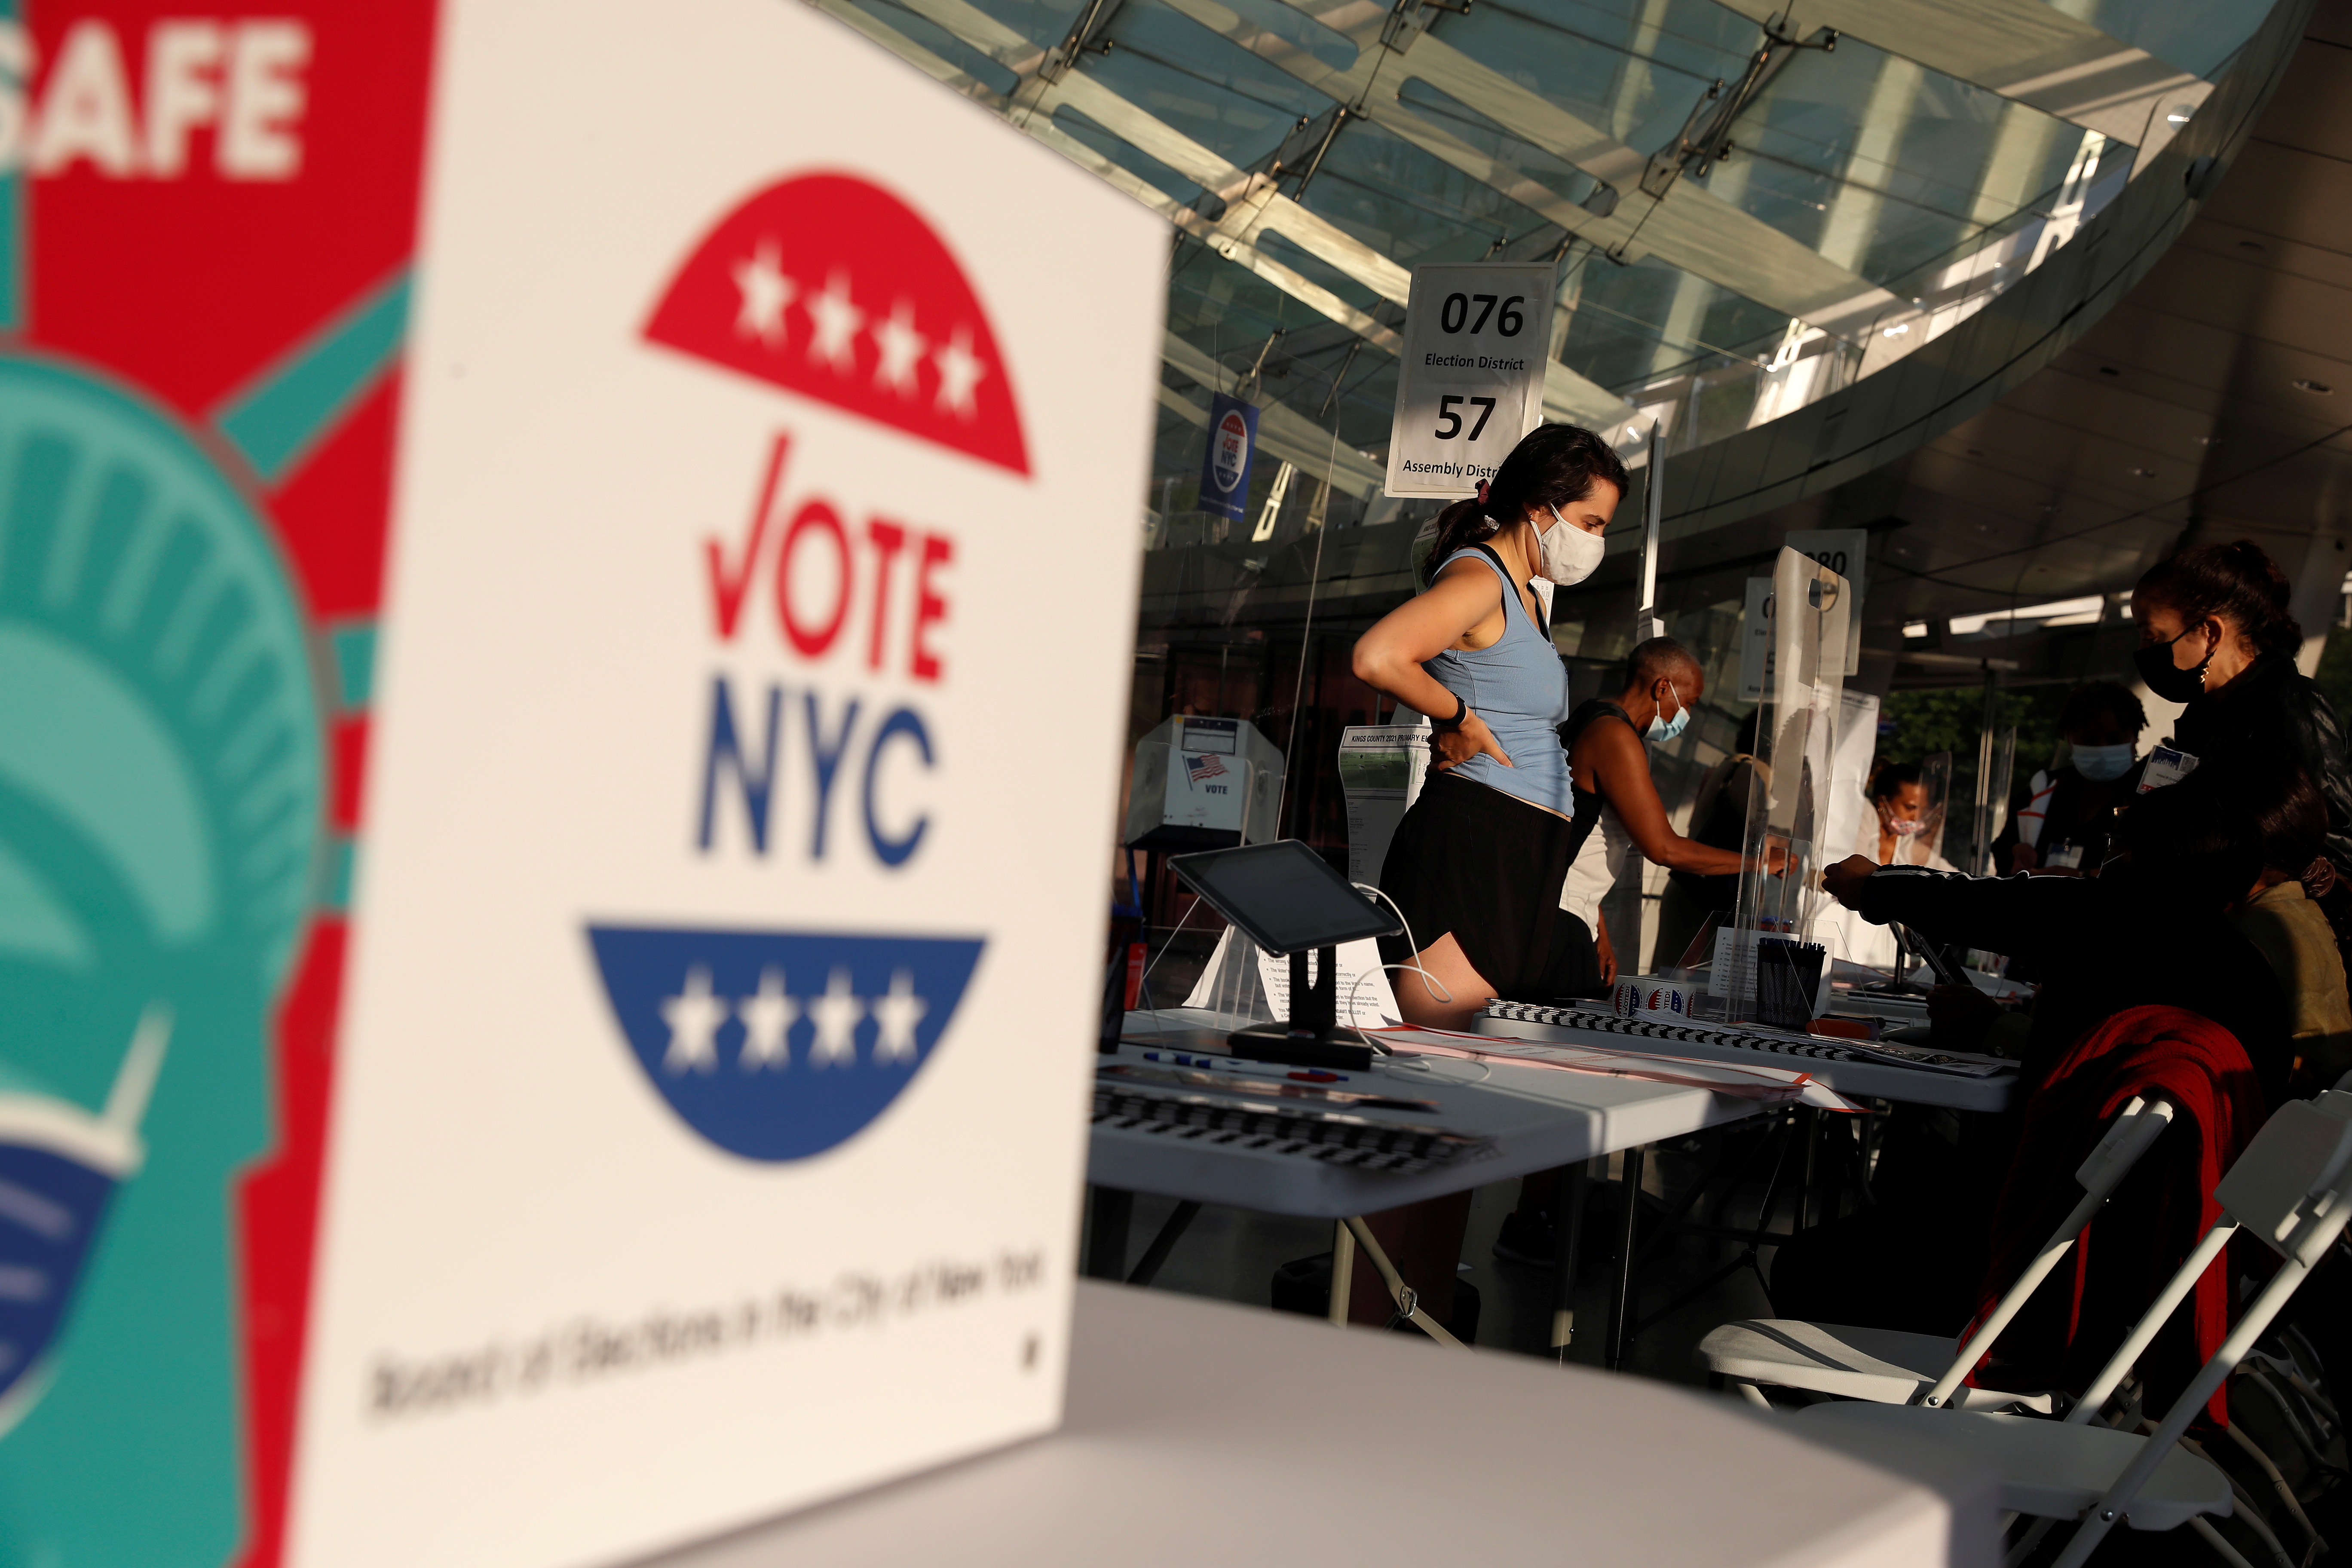 People wait to check in for voting in the New York Primary election at the Brooklyn Museum voting station in New York City, U.S., June 22, 2021. REUTERS/Shannon Stapleton